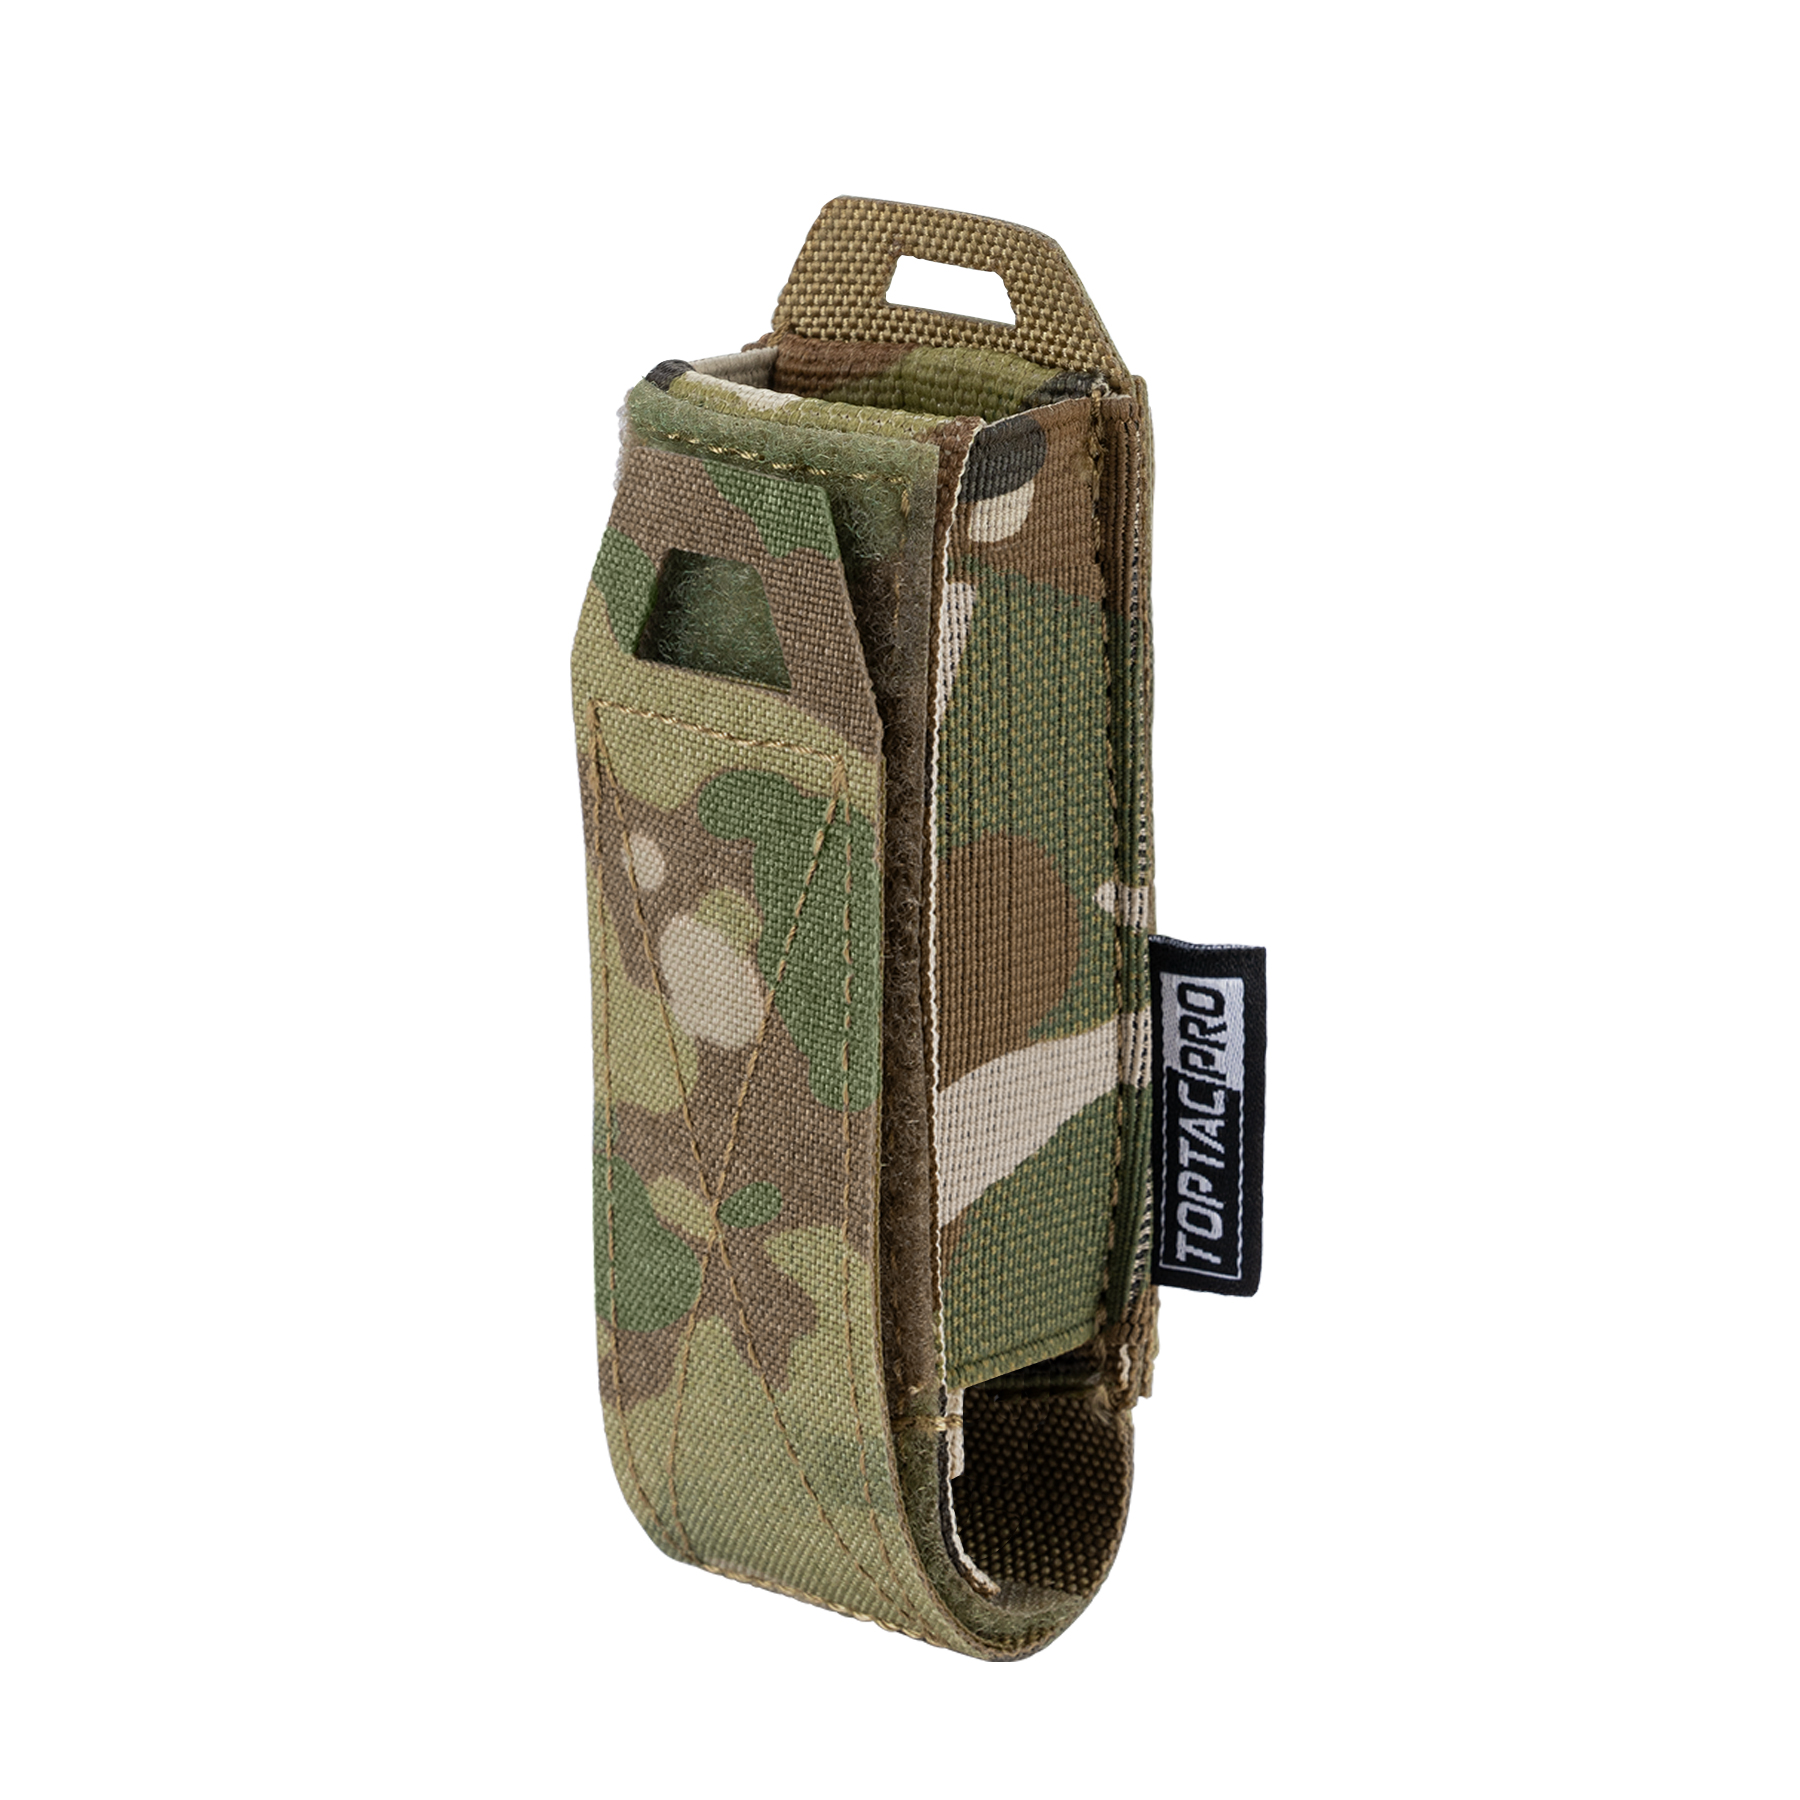 TOPTACPRO Tactical Mag Pouch 9mm Pistol Mag Carrier Fast release Expandable MOLLE 8501-IDOGEAR INDUSTRIAL